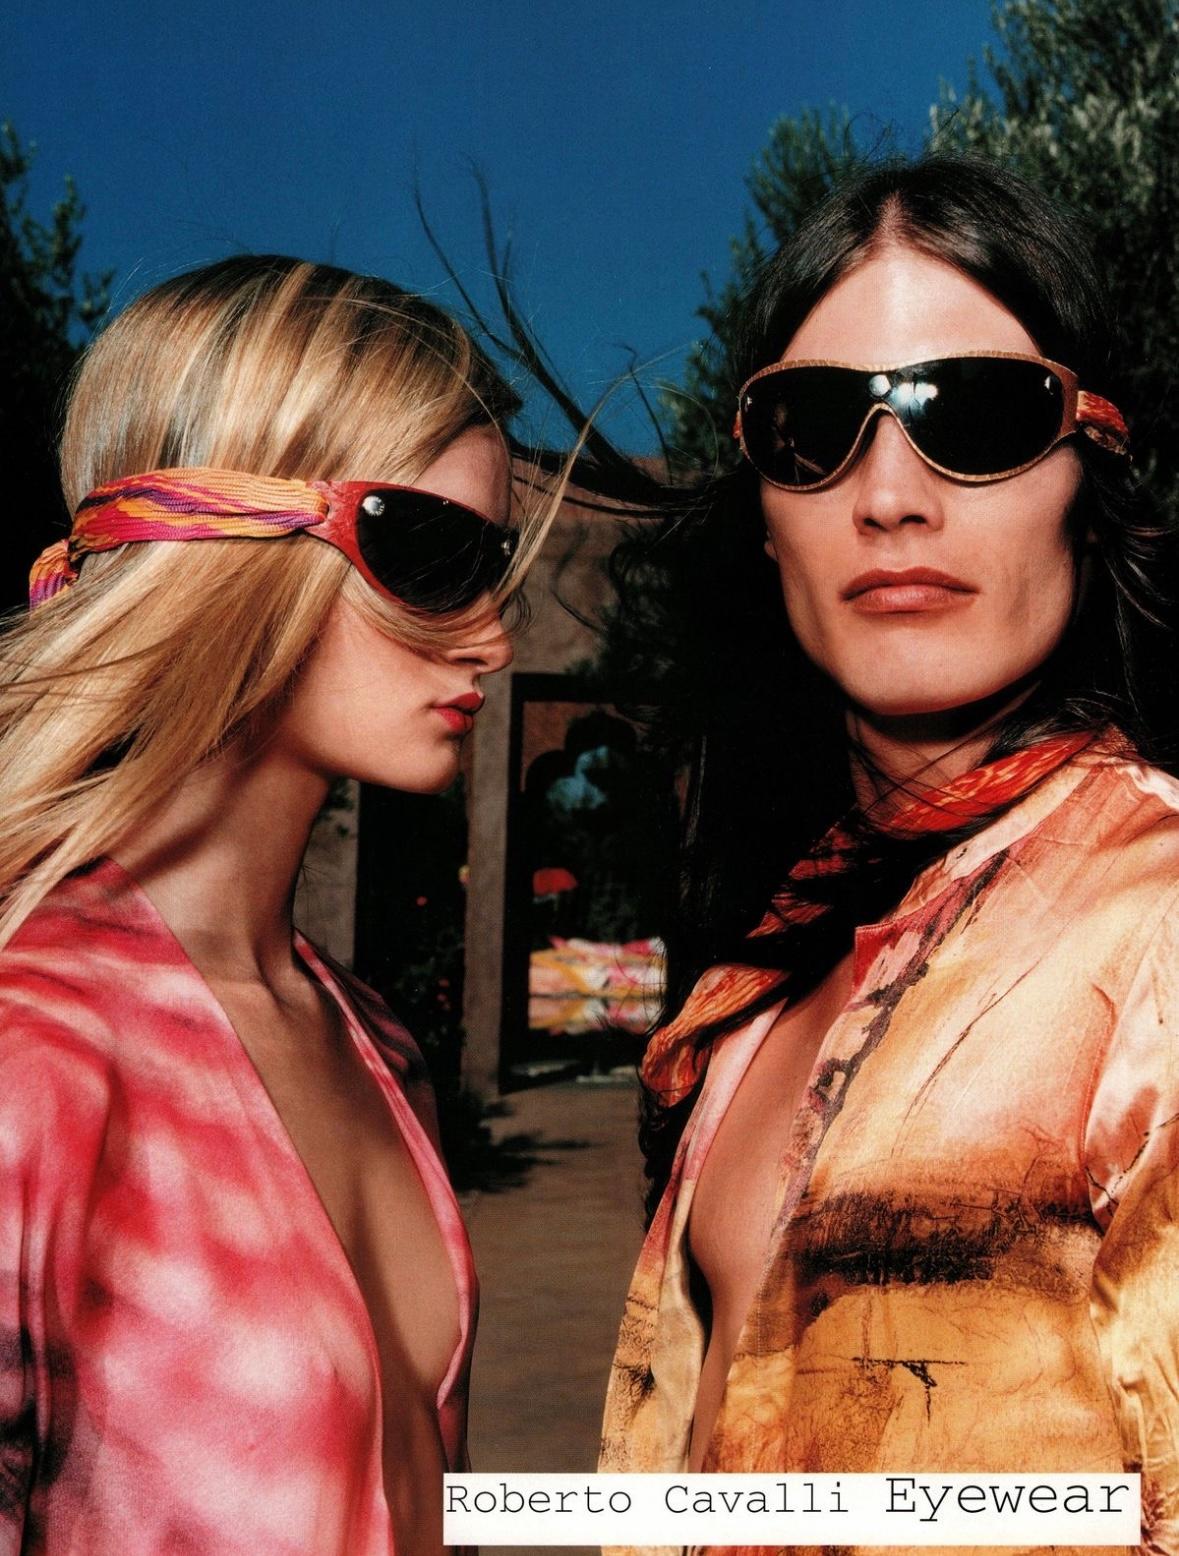 From the Spring/Summer 2001 collection, similar sunnies to these light blue Roberto Cavalli shield sunglasses were highlighted in the season’s ad campaign. These unique sunglasses feature a leather frame and a removable snap-on blue shield lens,